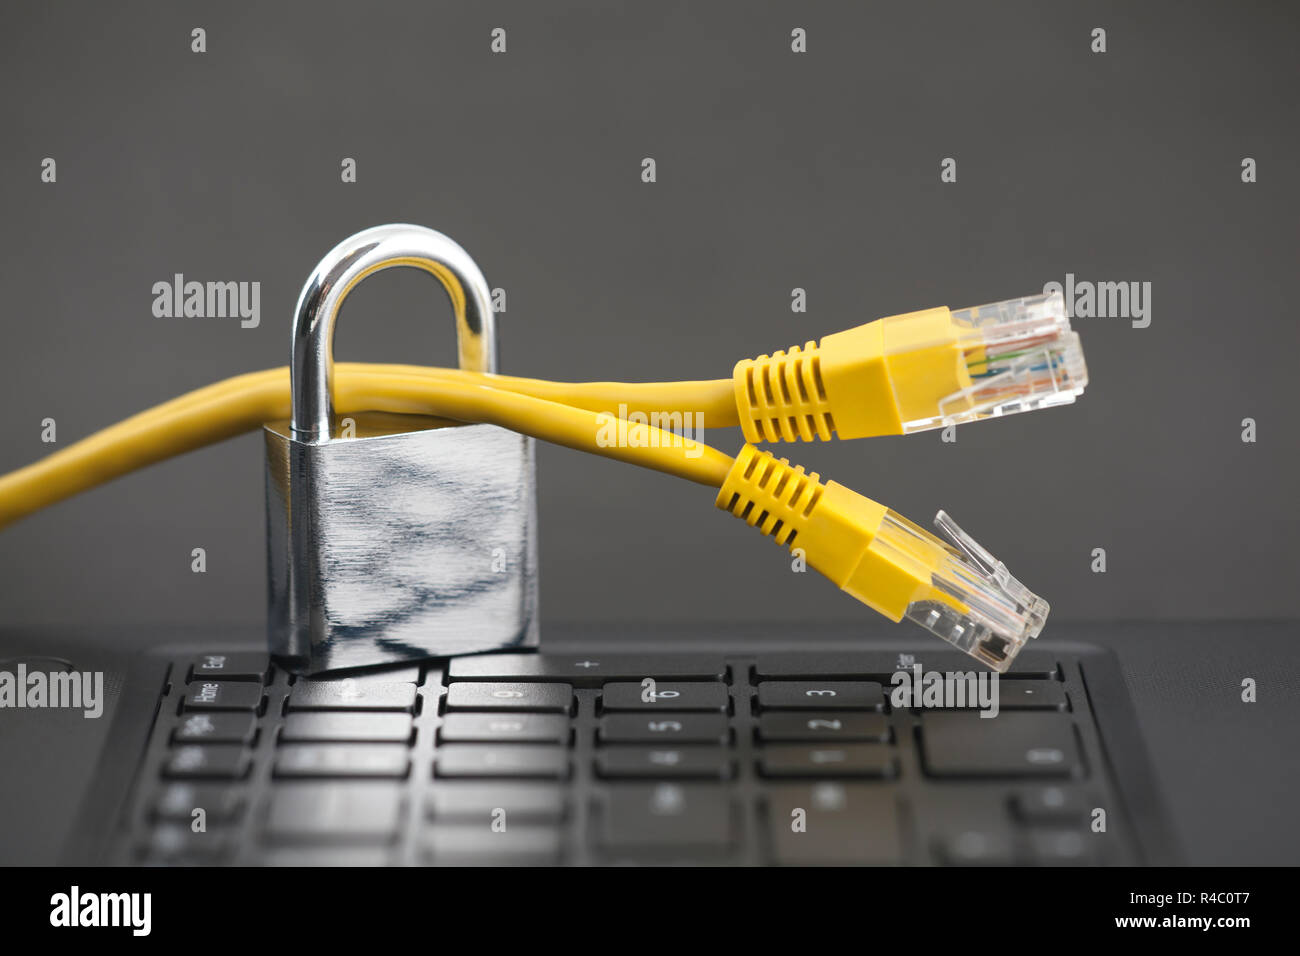 Internet security concept. Padlock with internet cables on computer keyboard Stock Photo